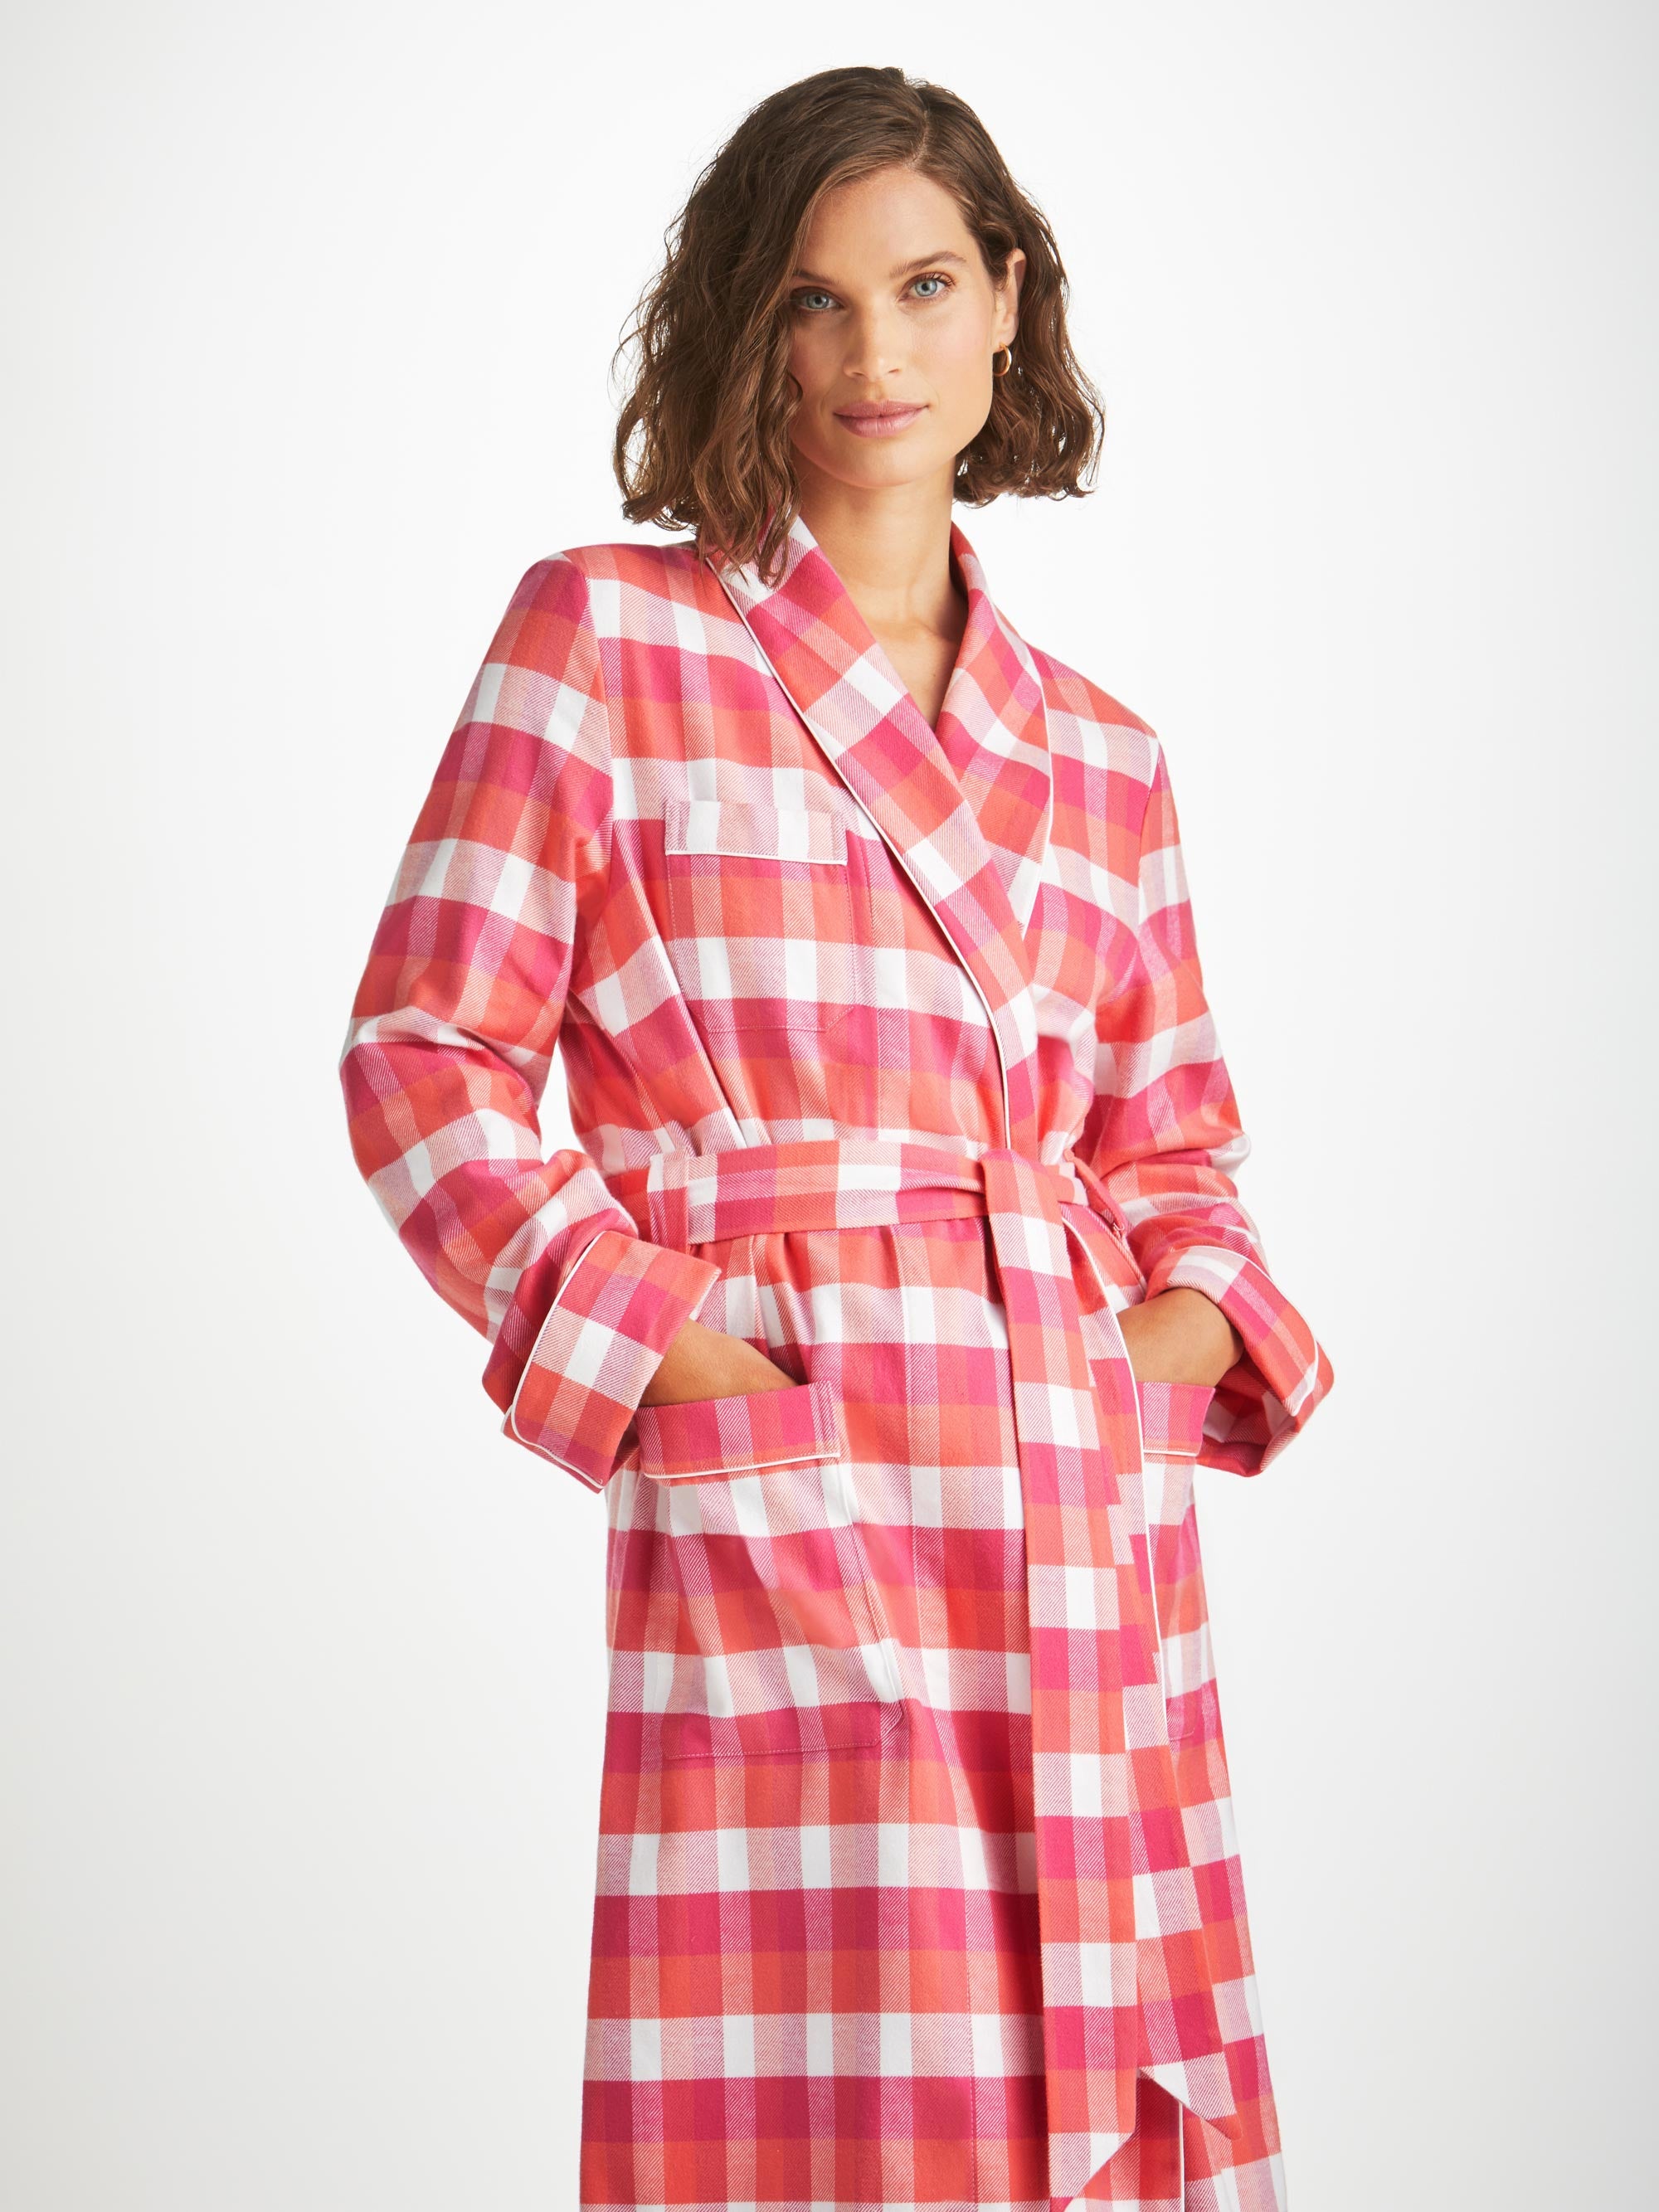 Bathrobes & Dressing gown in the size 18-24 months for Girls on sale |  FASHIOLA INDIA